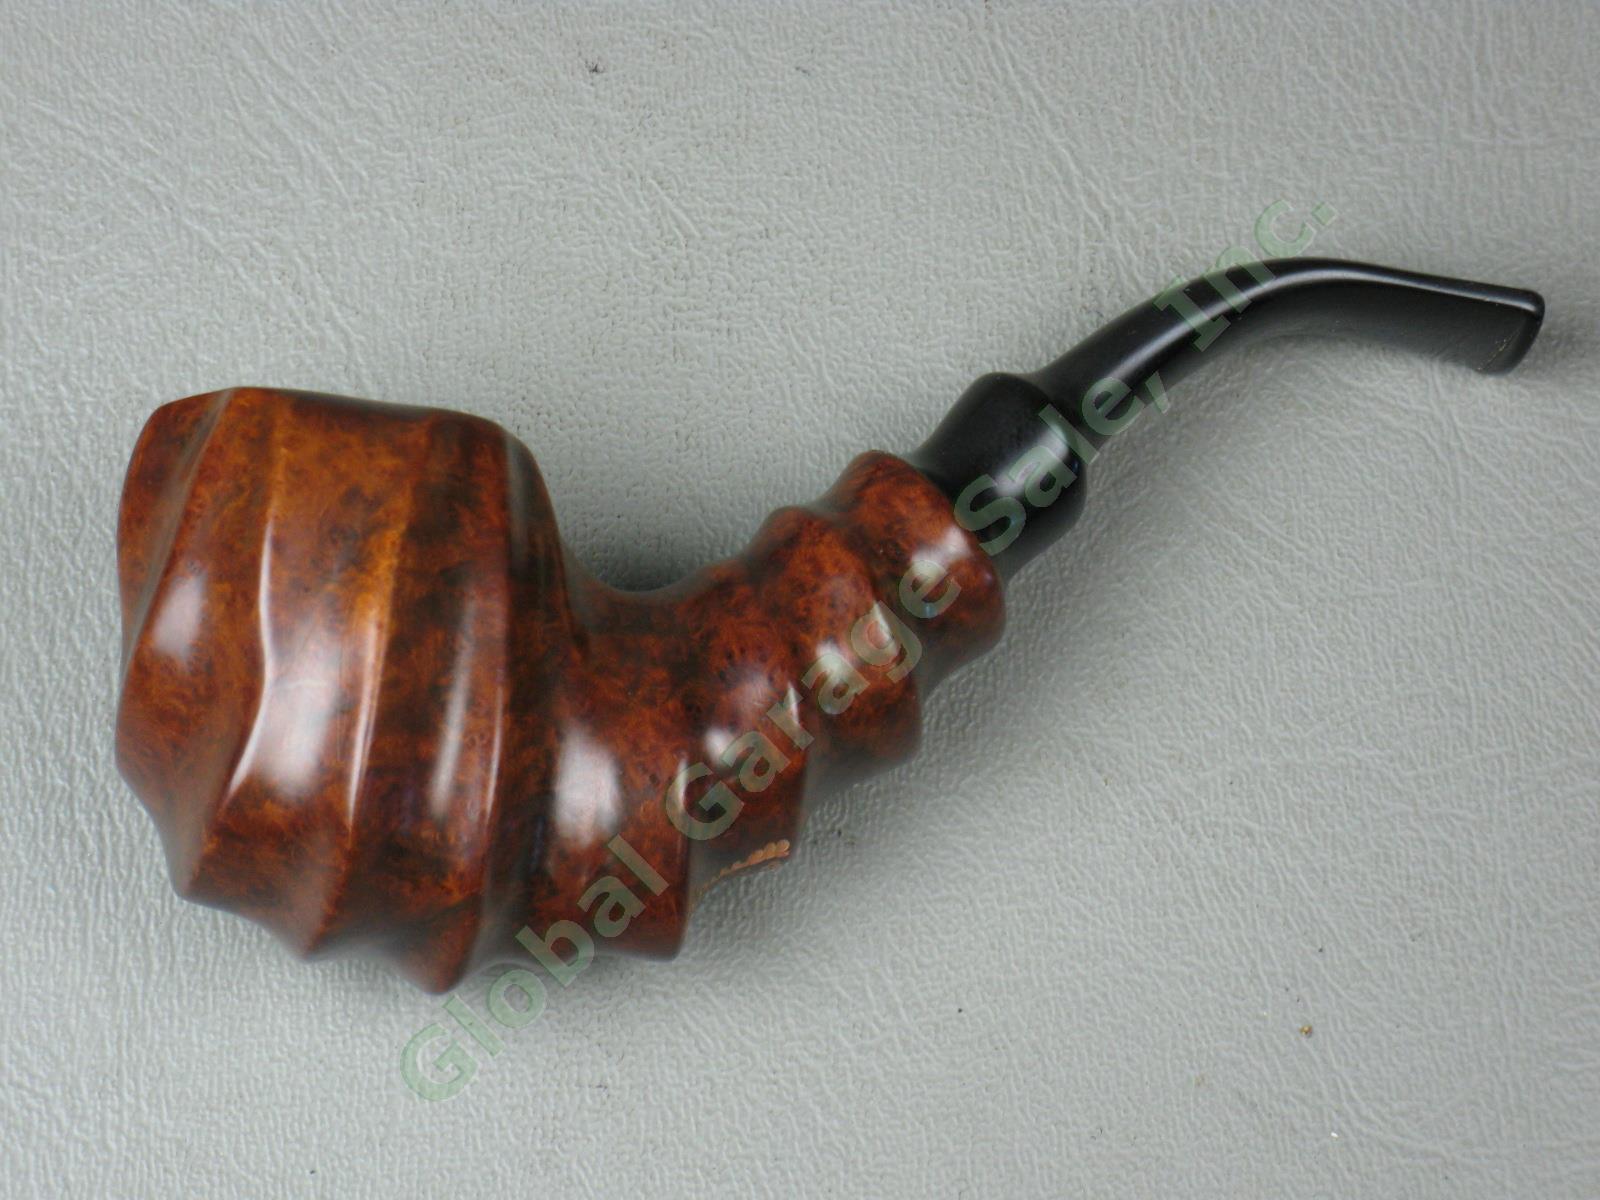 JM Boswell 2003 Freehand Fluted Tobacco Pipe w/Box + Thompson Case Nice Grain!! 2